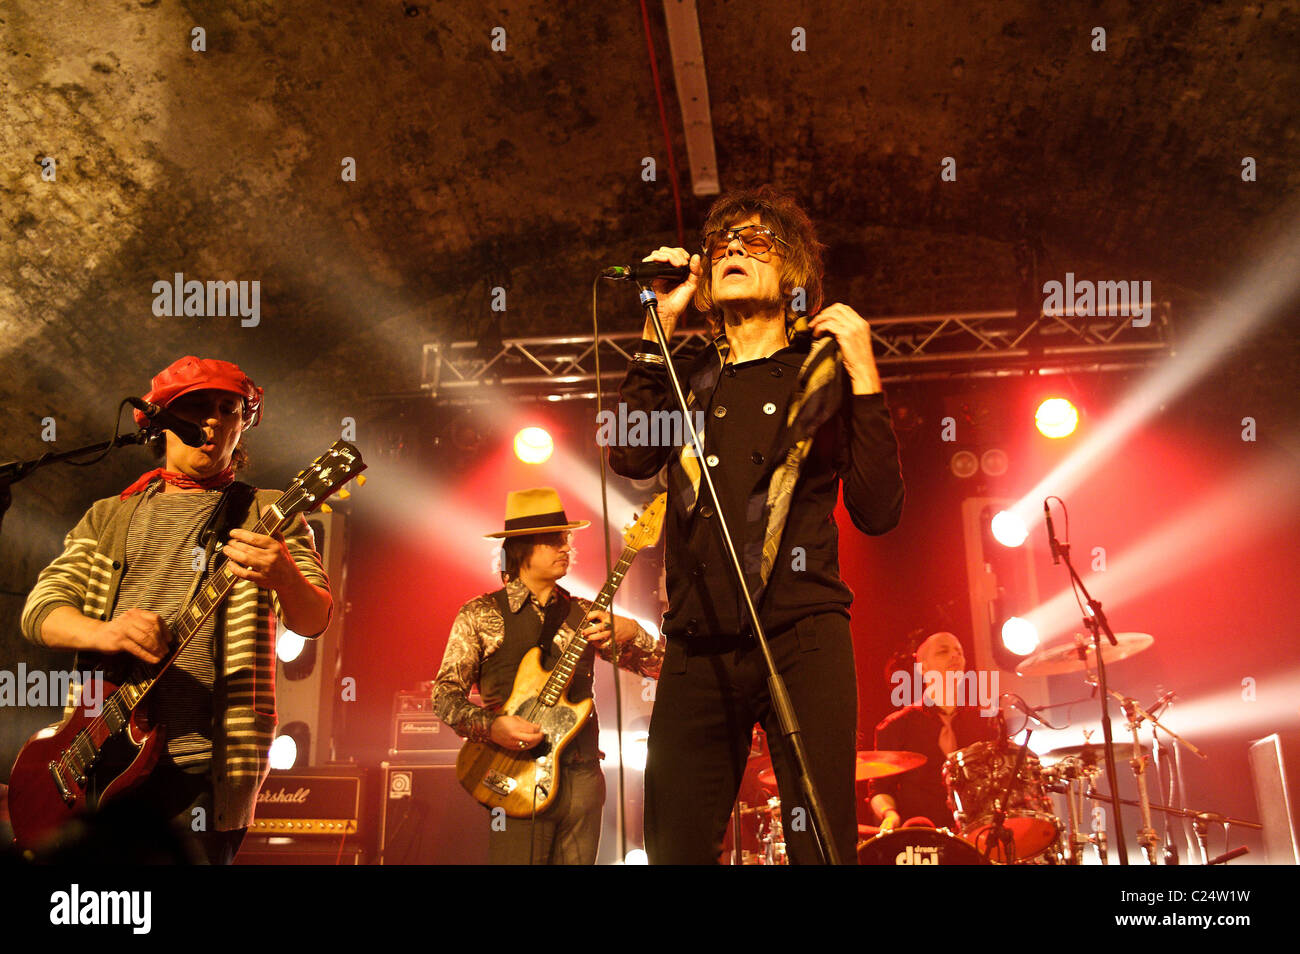 The New York Dolls play an intimate gig at the Old Vic Tunnels under Waterloo Station, London on 31st March 2011. Stock Photo